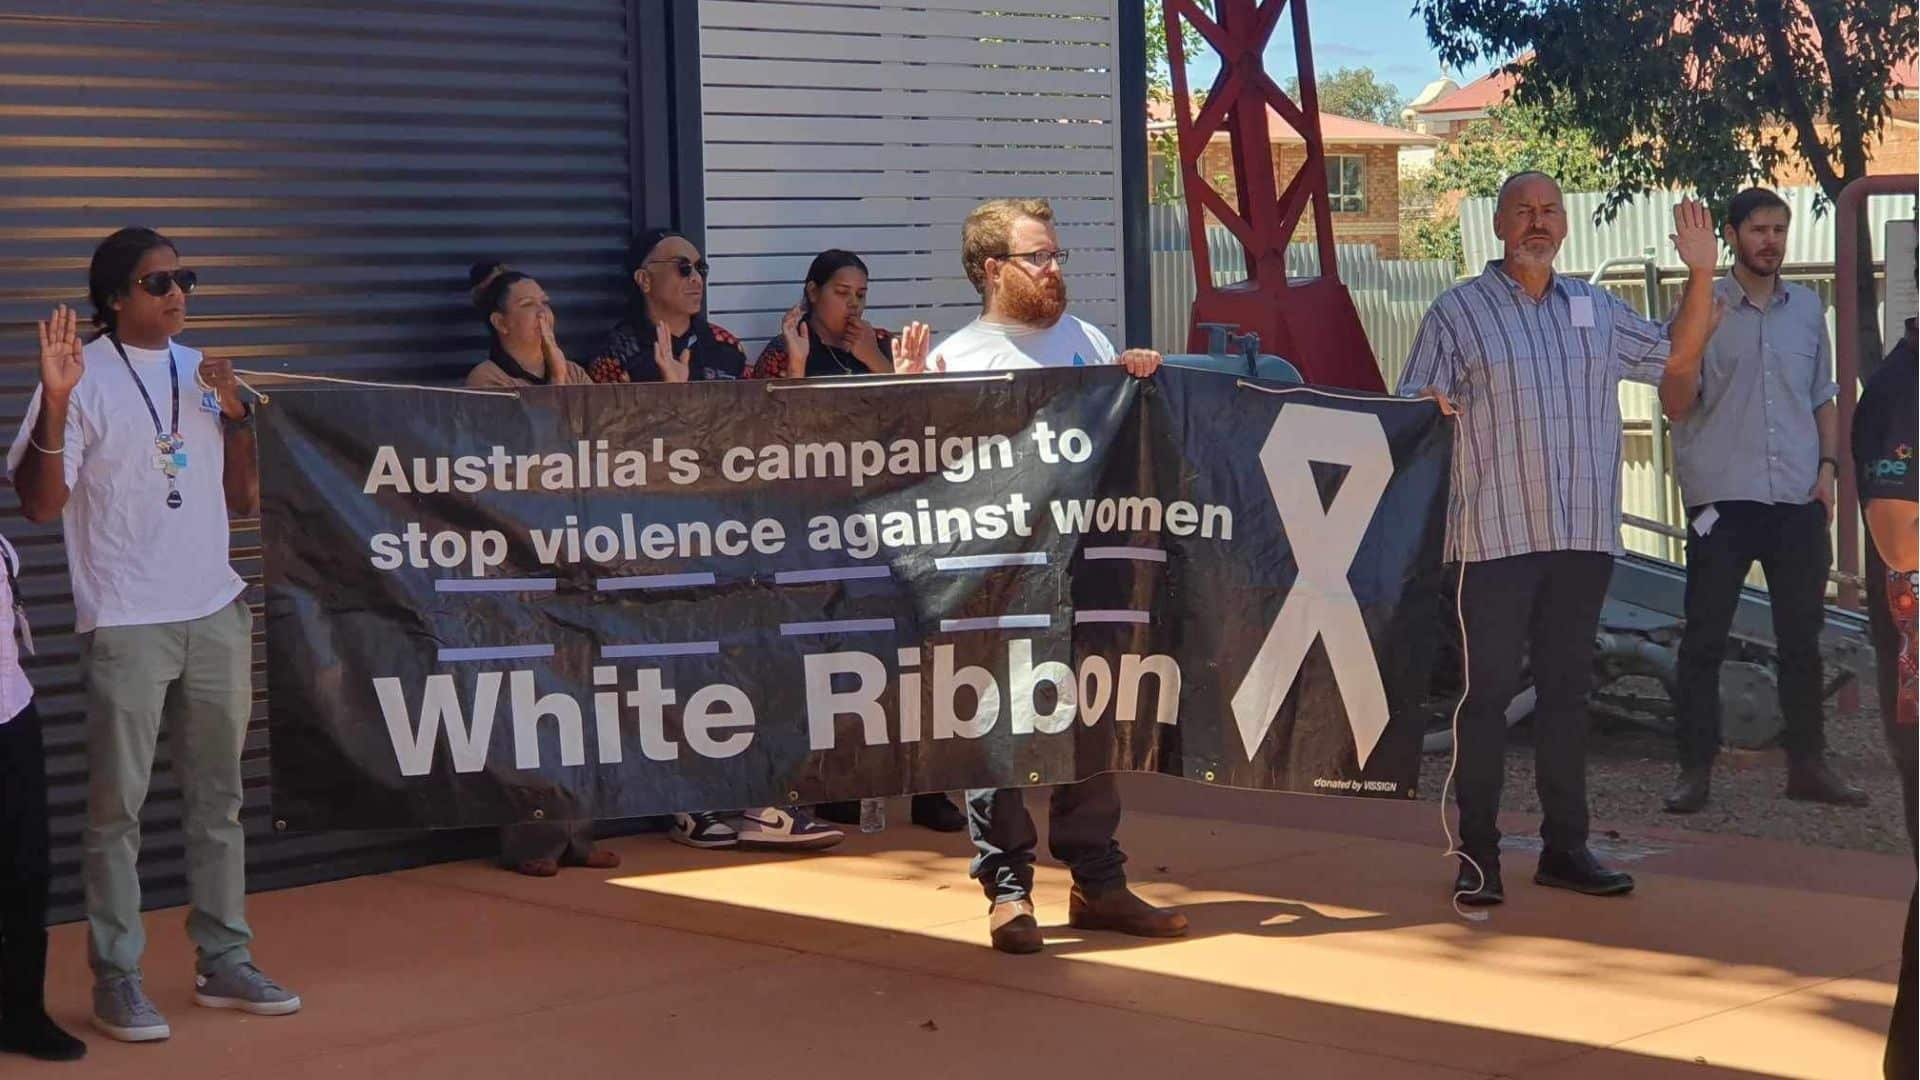 FDV Pledge: A group of men and women stand with their hands raised, palms out, looking solemn. Two are holding a banner that reads: "Australia's campaign to stop violence against women."